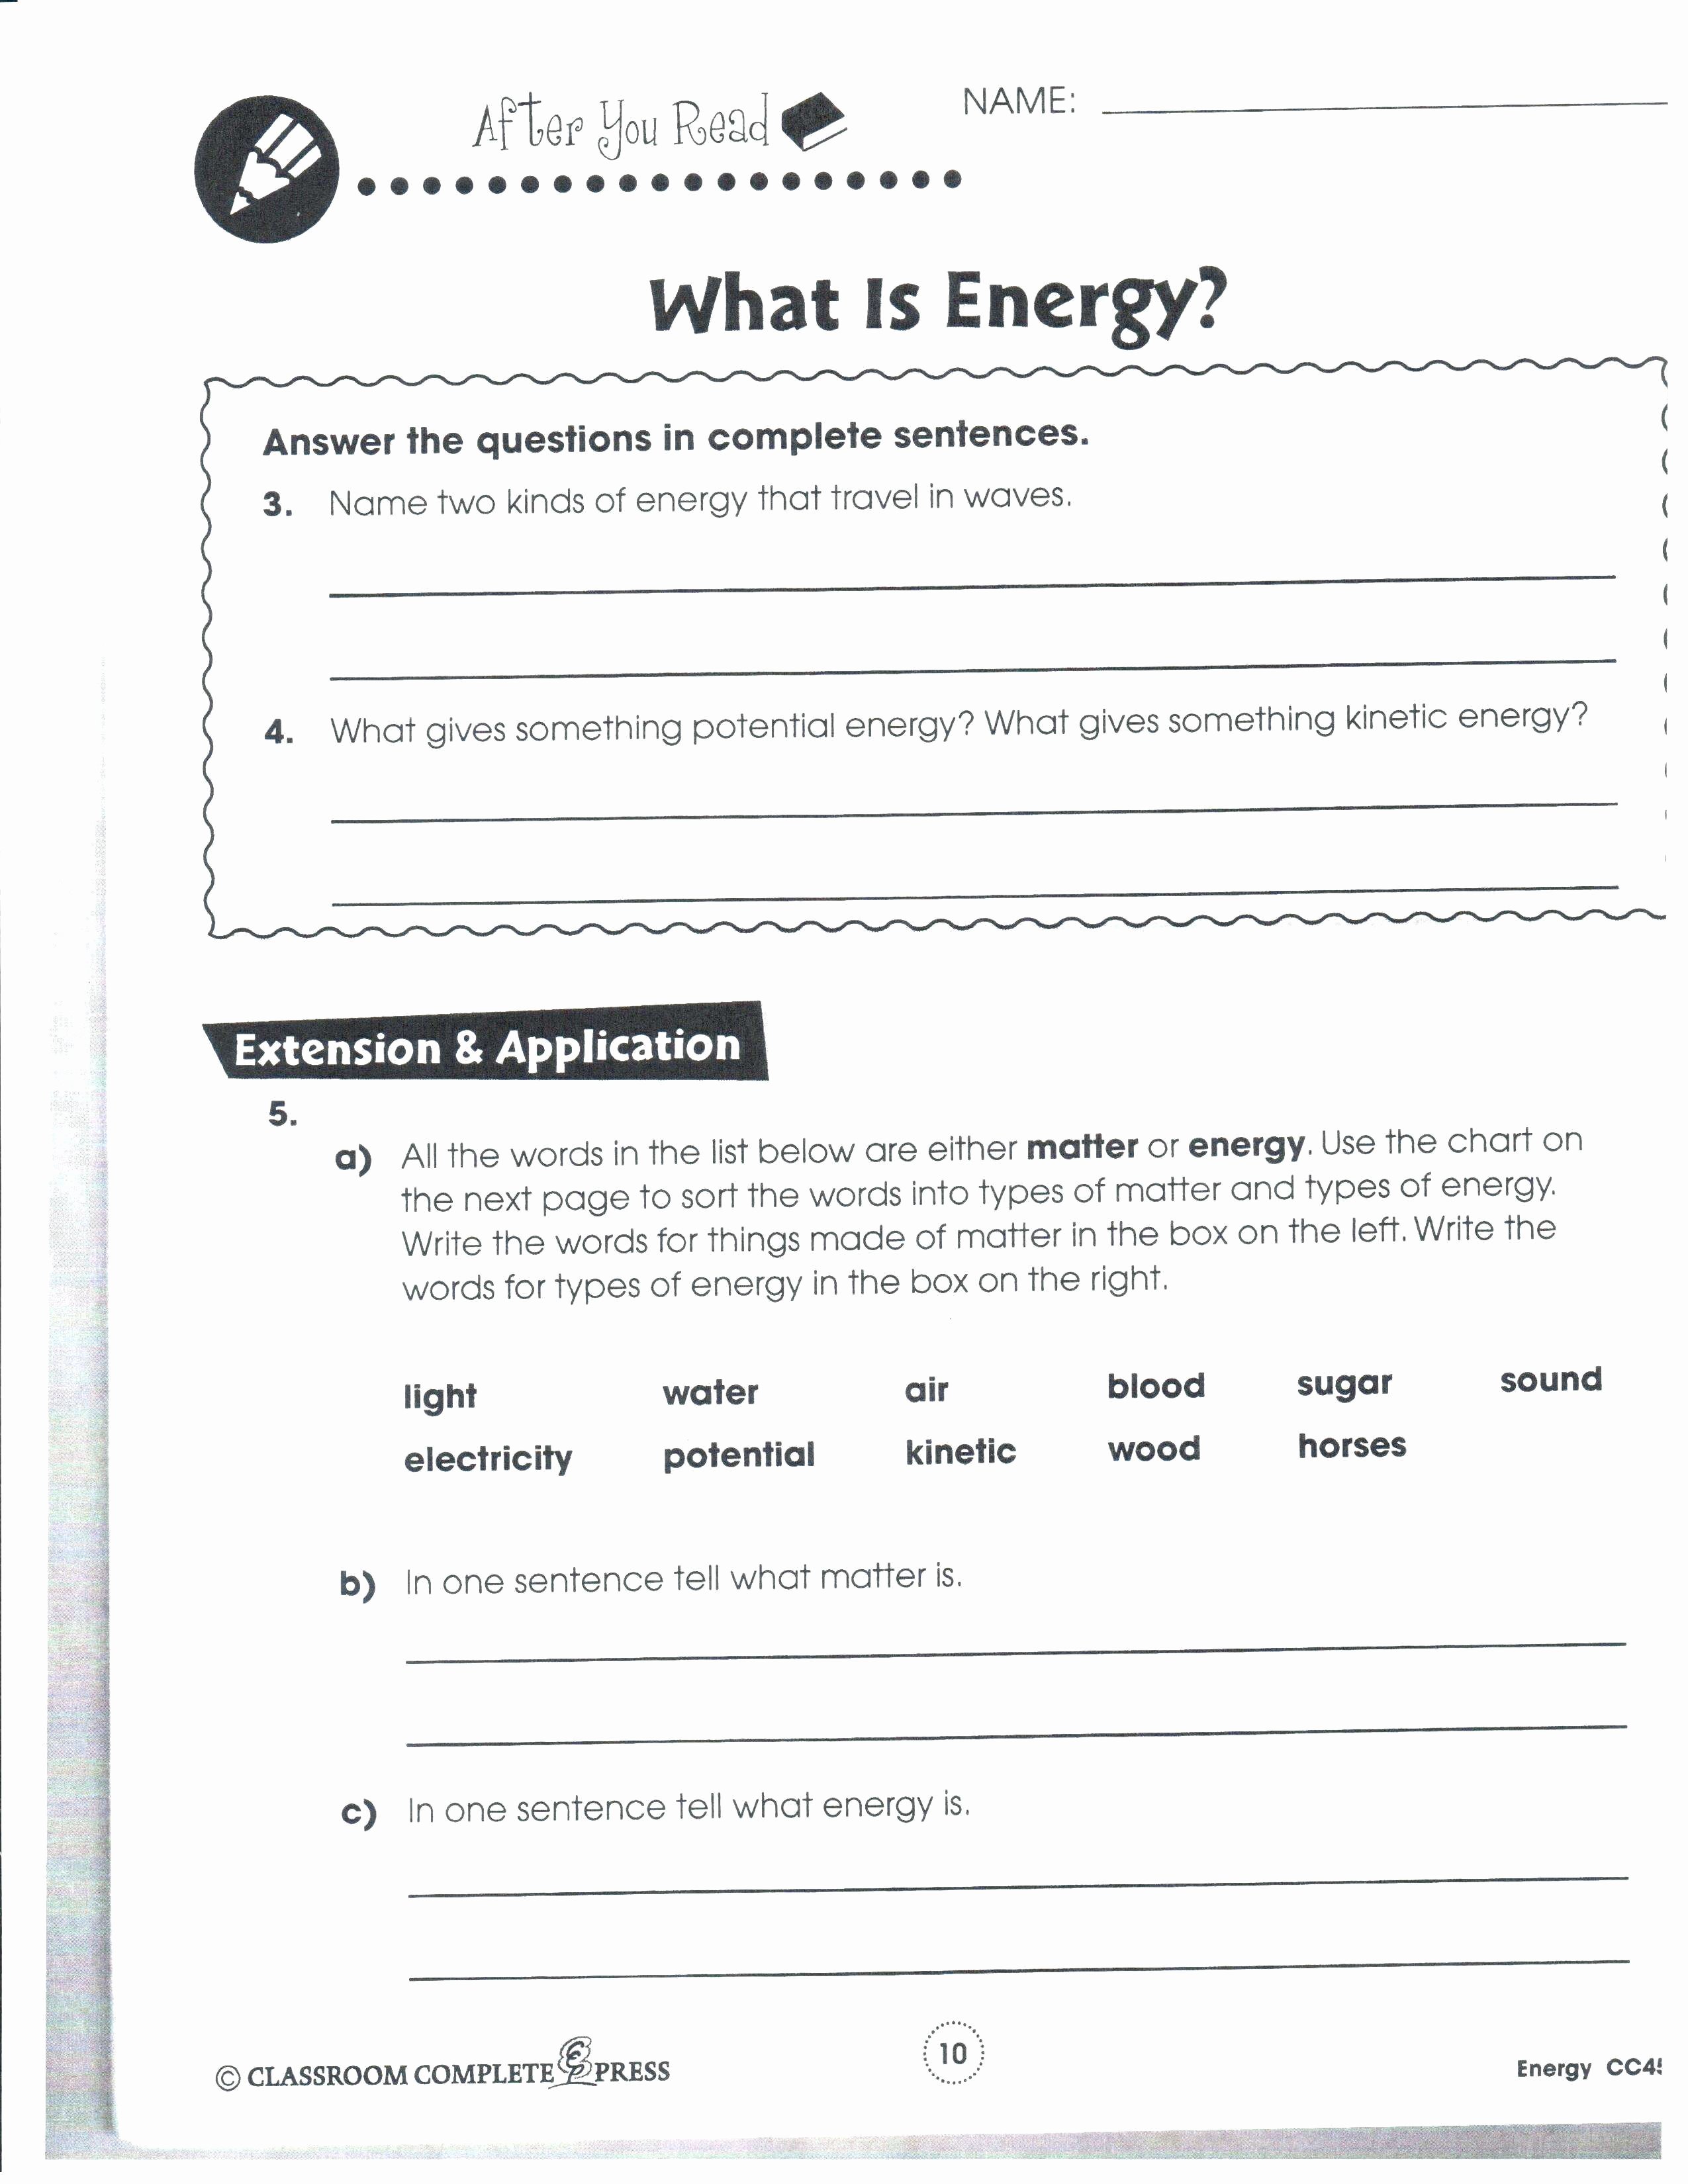 Classifying Matter Worksheet Answers Unique Classification Matter Worksheet Chemistry Answers